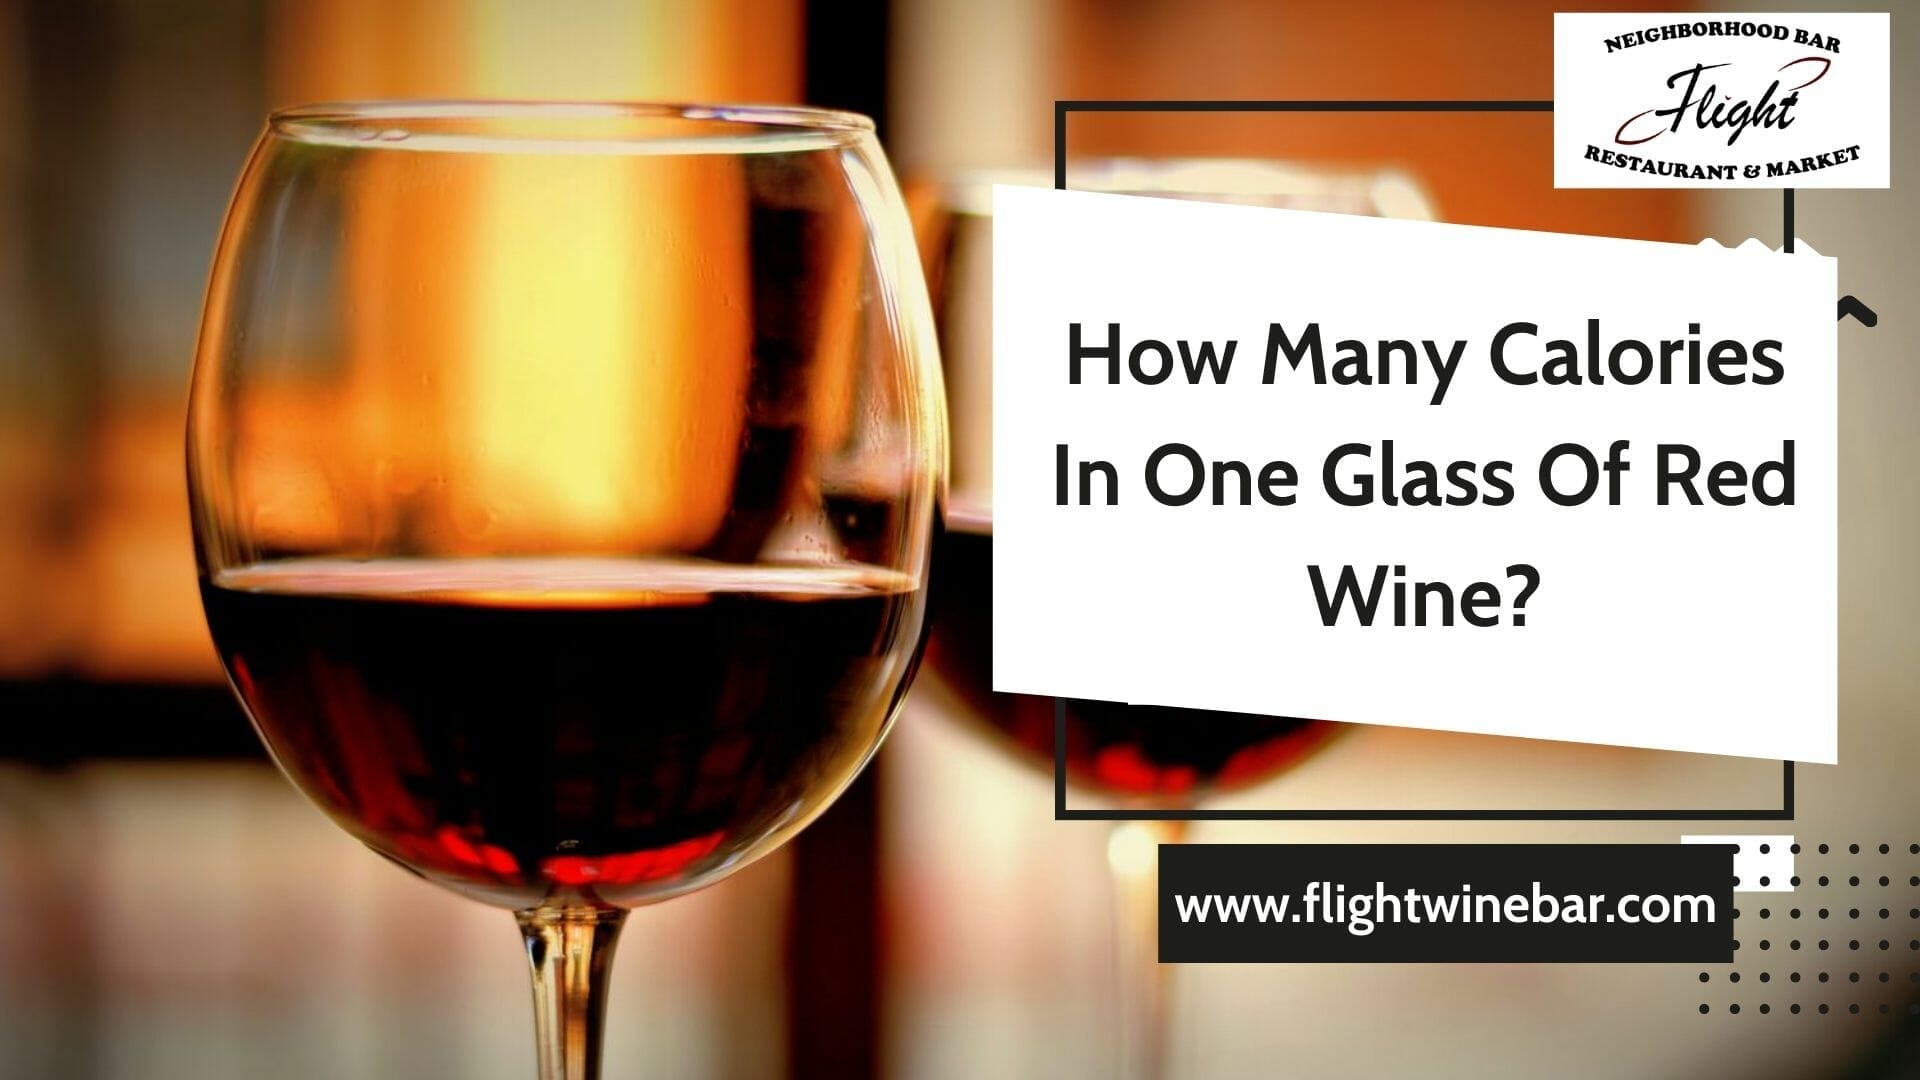 How Many Calories In One Glass Of Red Wine